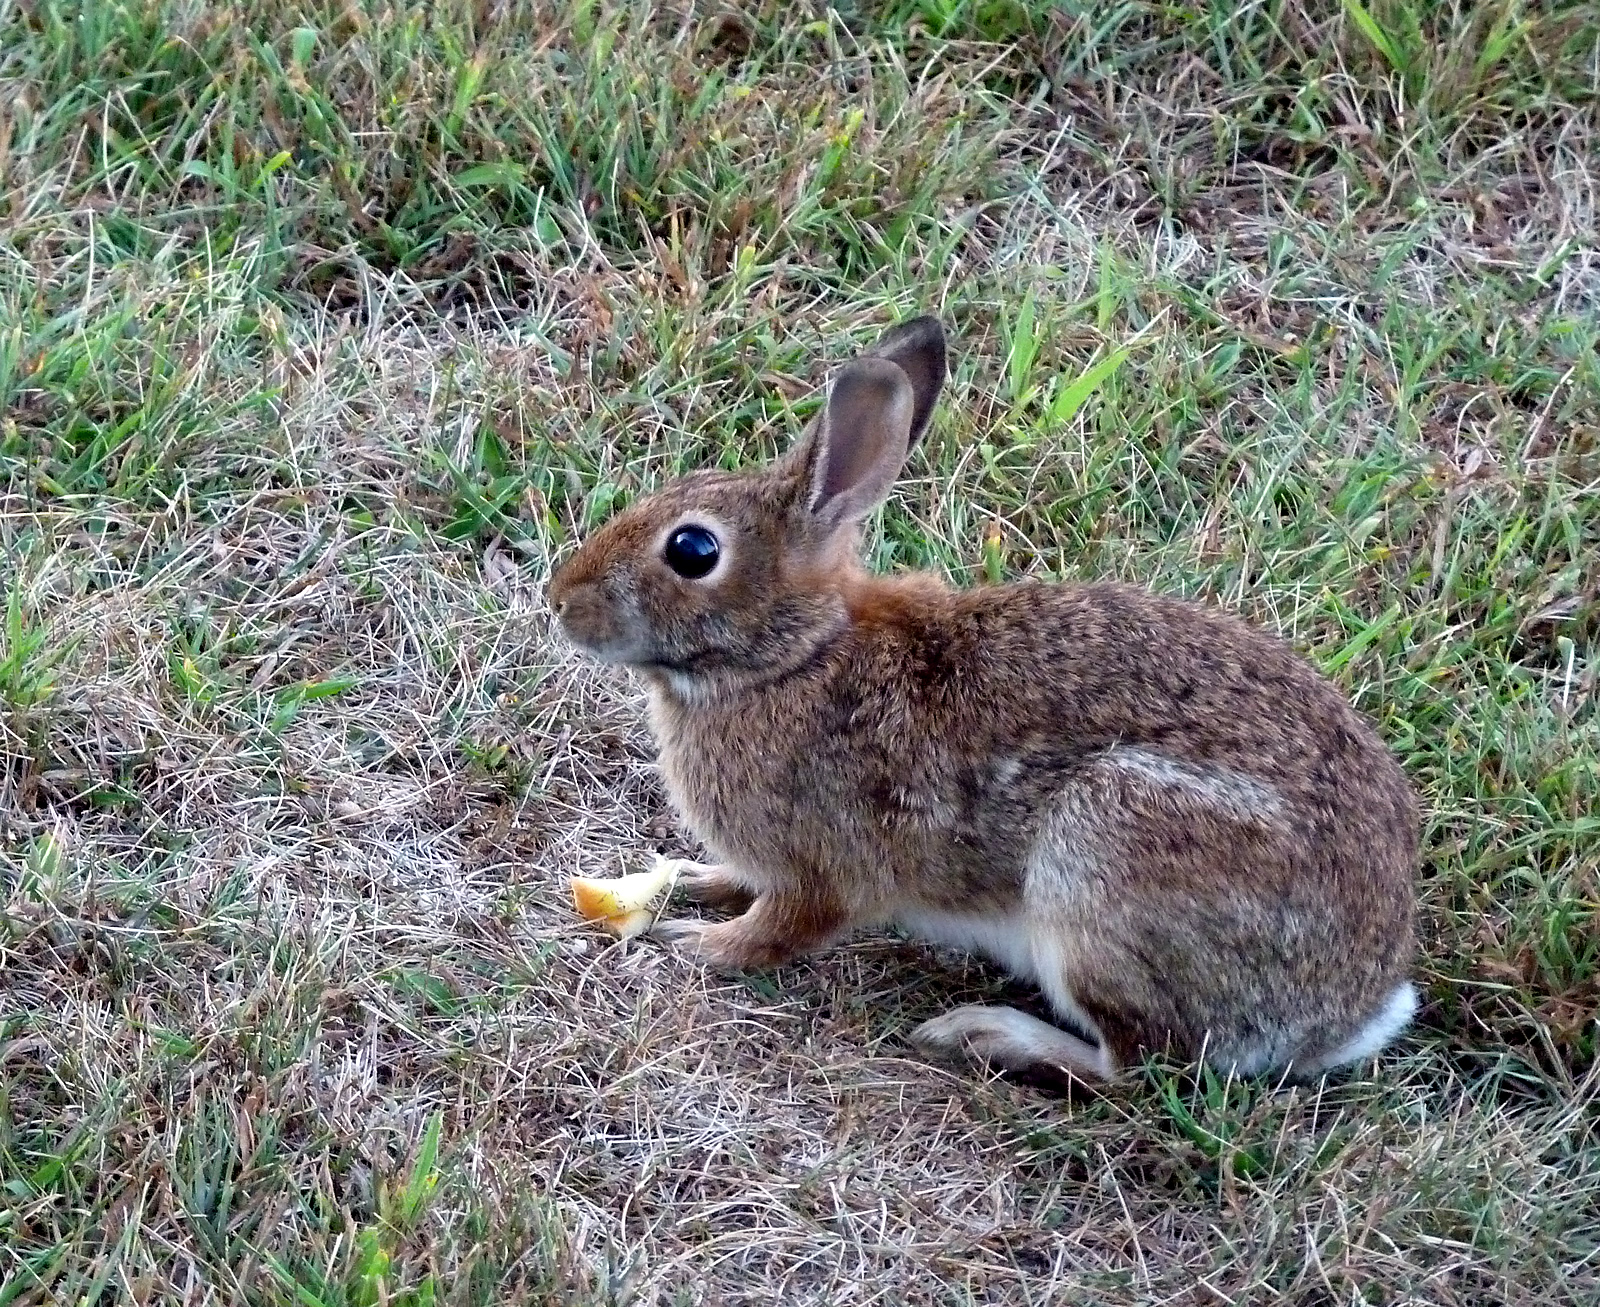 a small bunny sitting in the grass next to a carrot